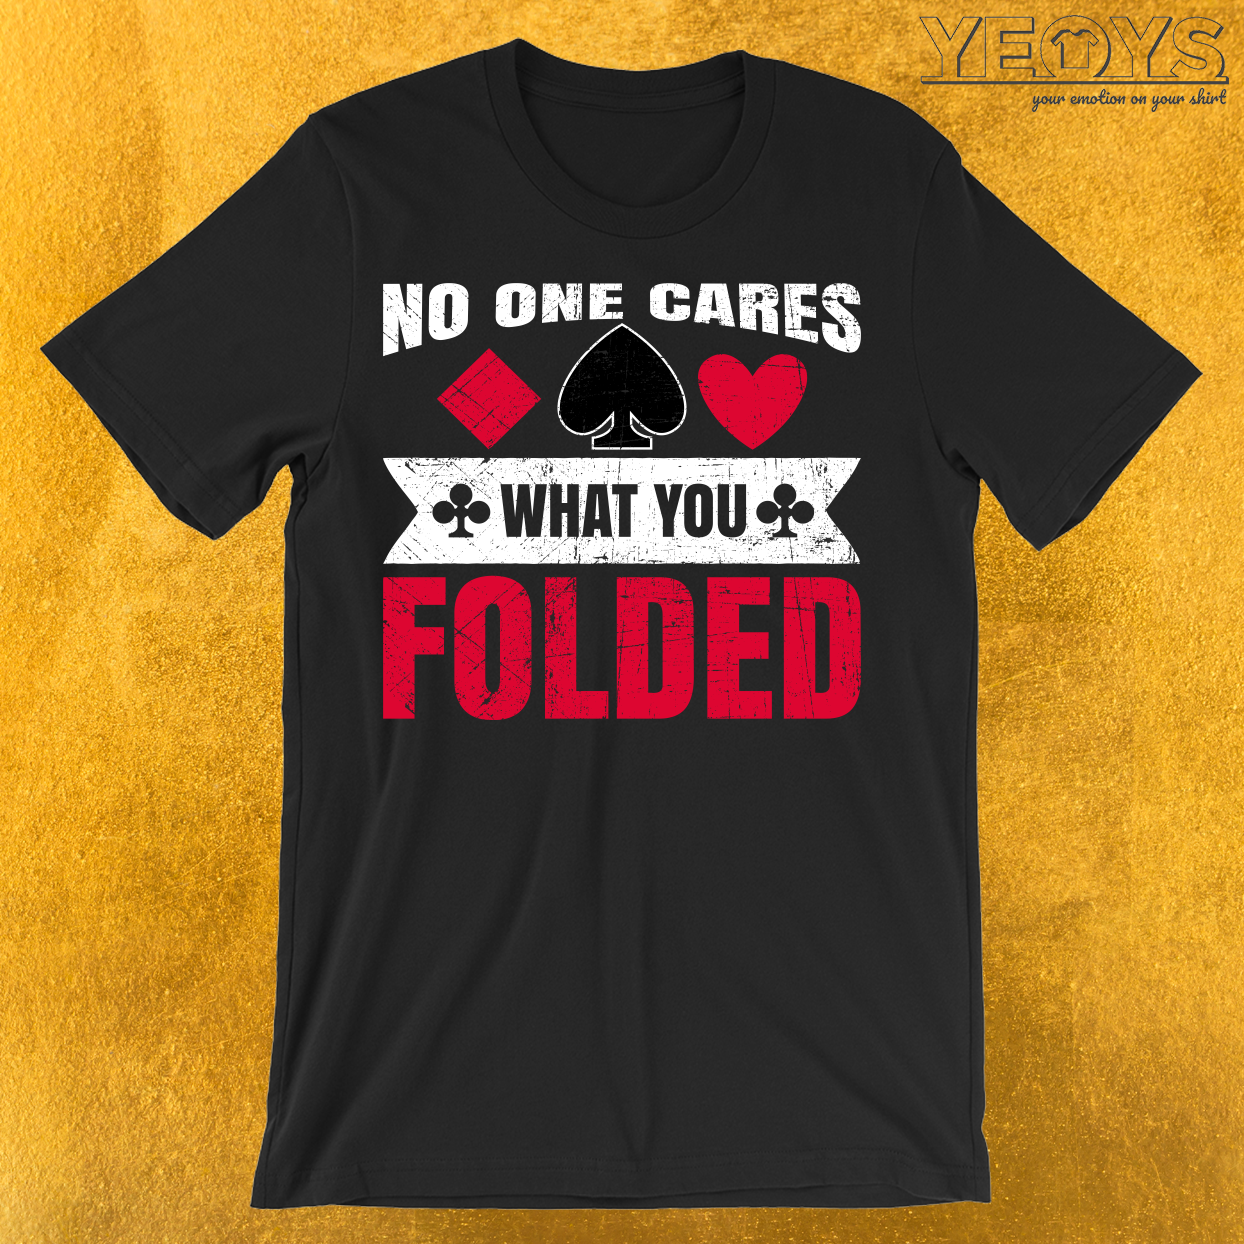 No One Cares What You Folded T-Shirt